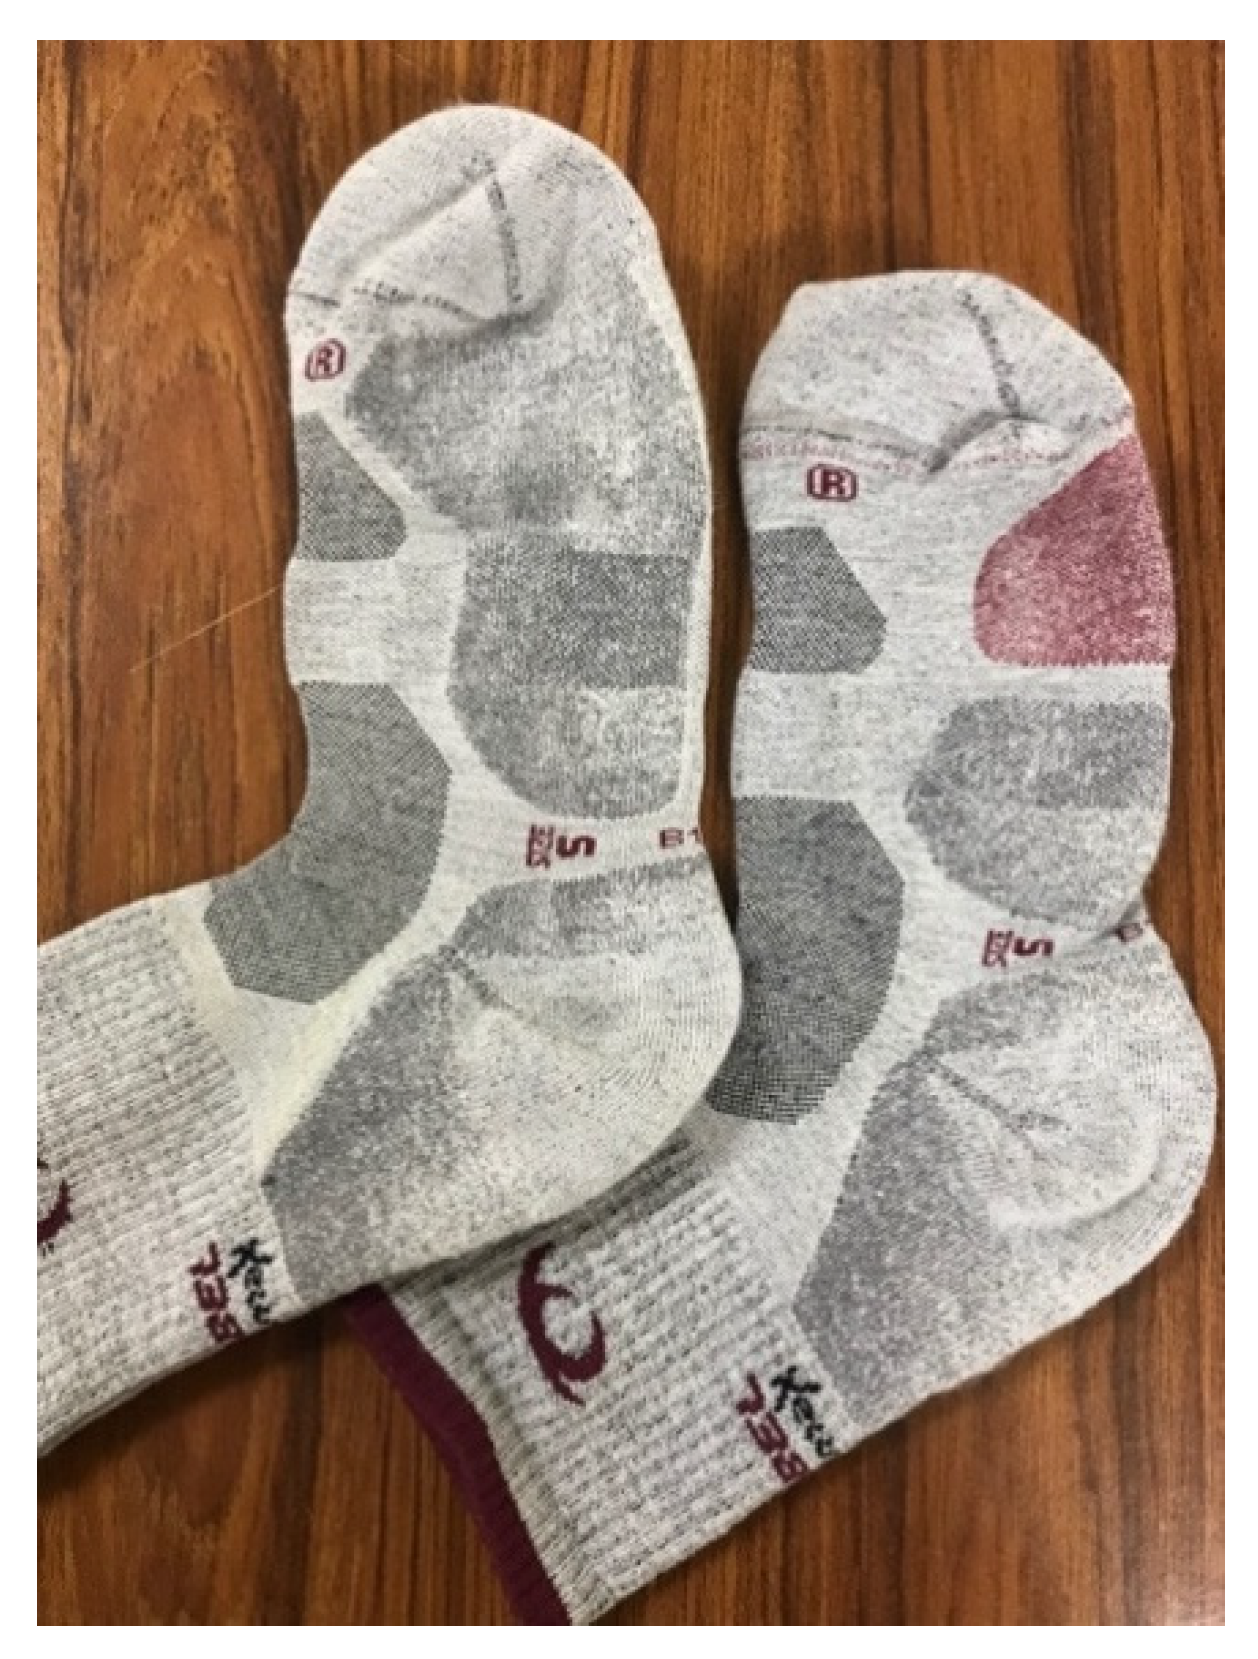 IJERPH | Free Full-Text | Effectiveness of a Central Discharge Element Sock  for Plantar Temperature Reduction and Improving Comfort